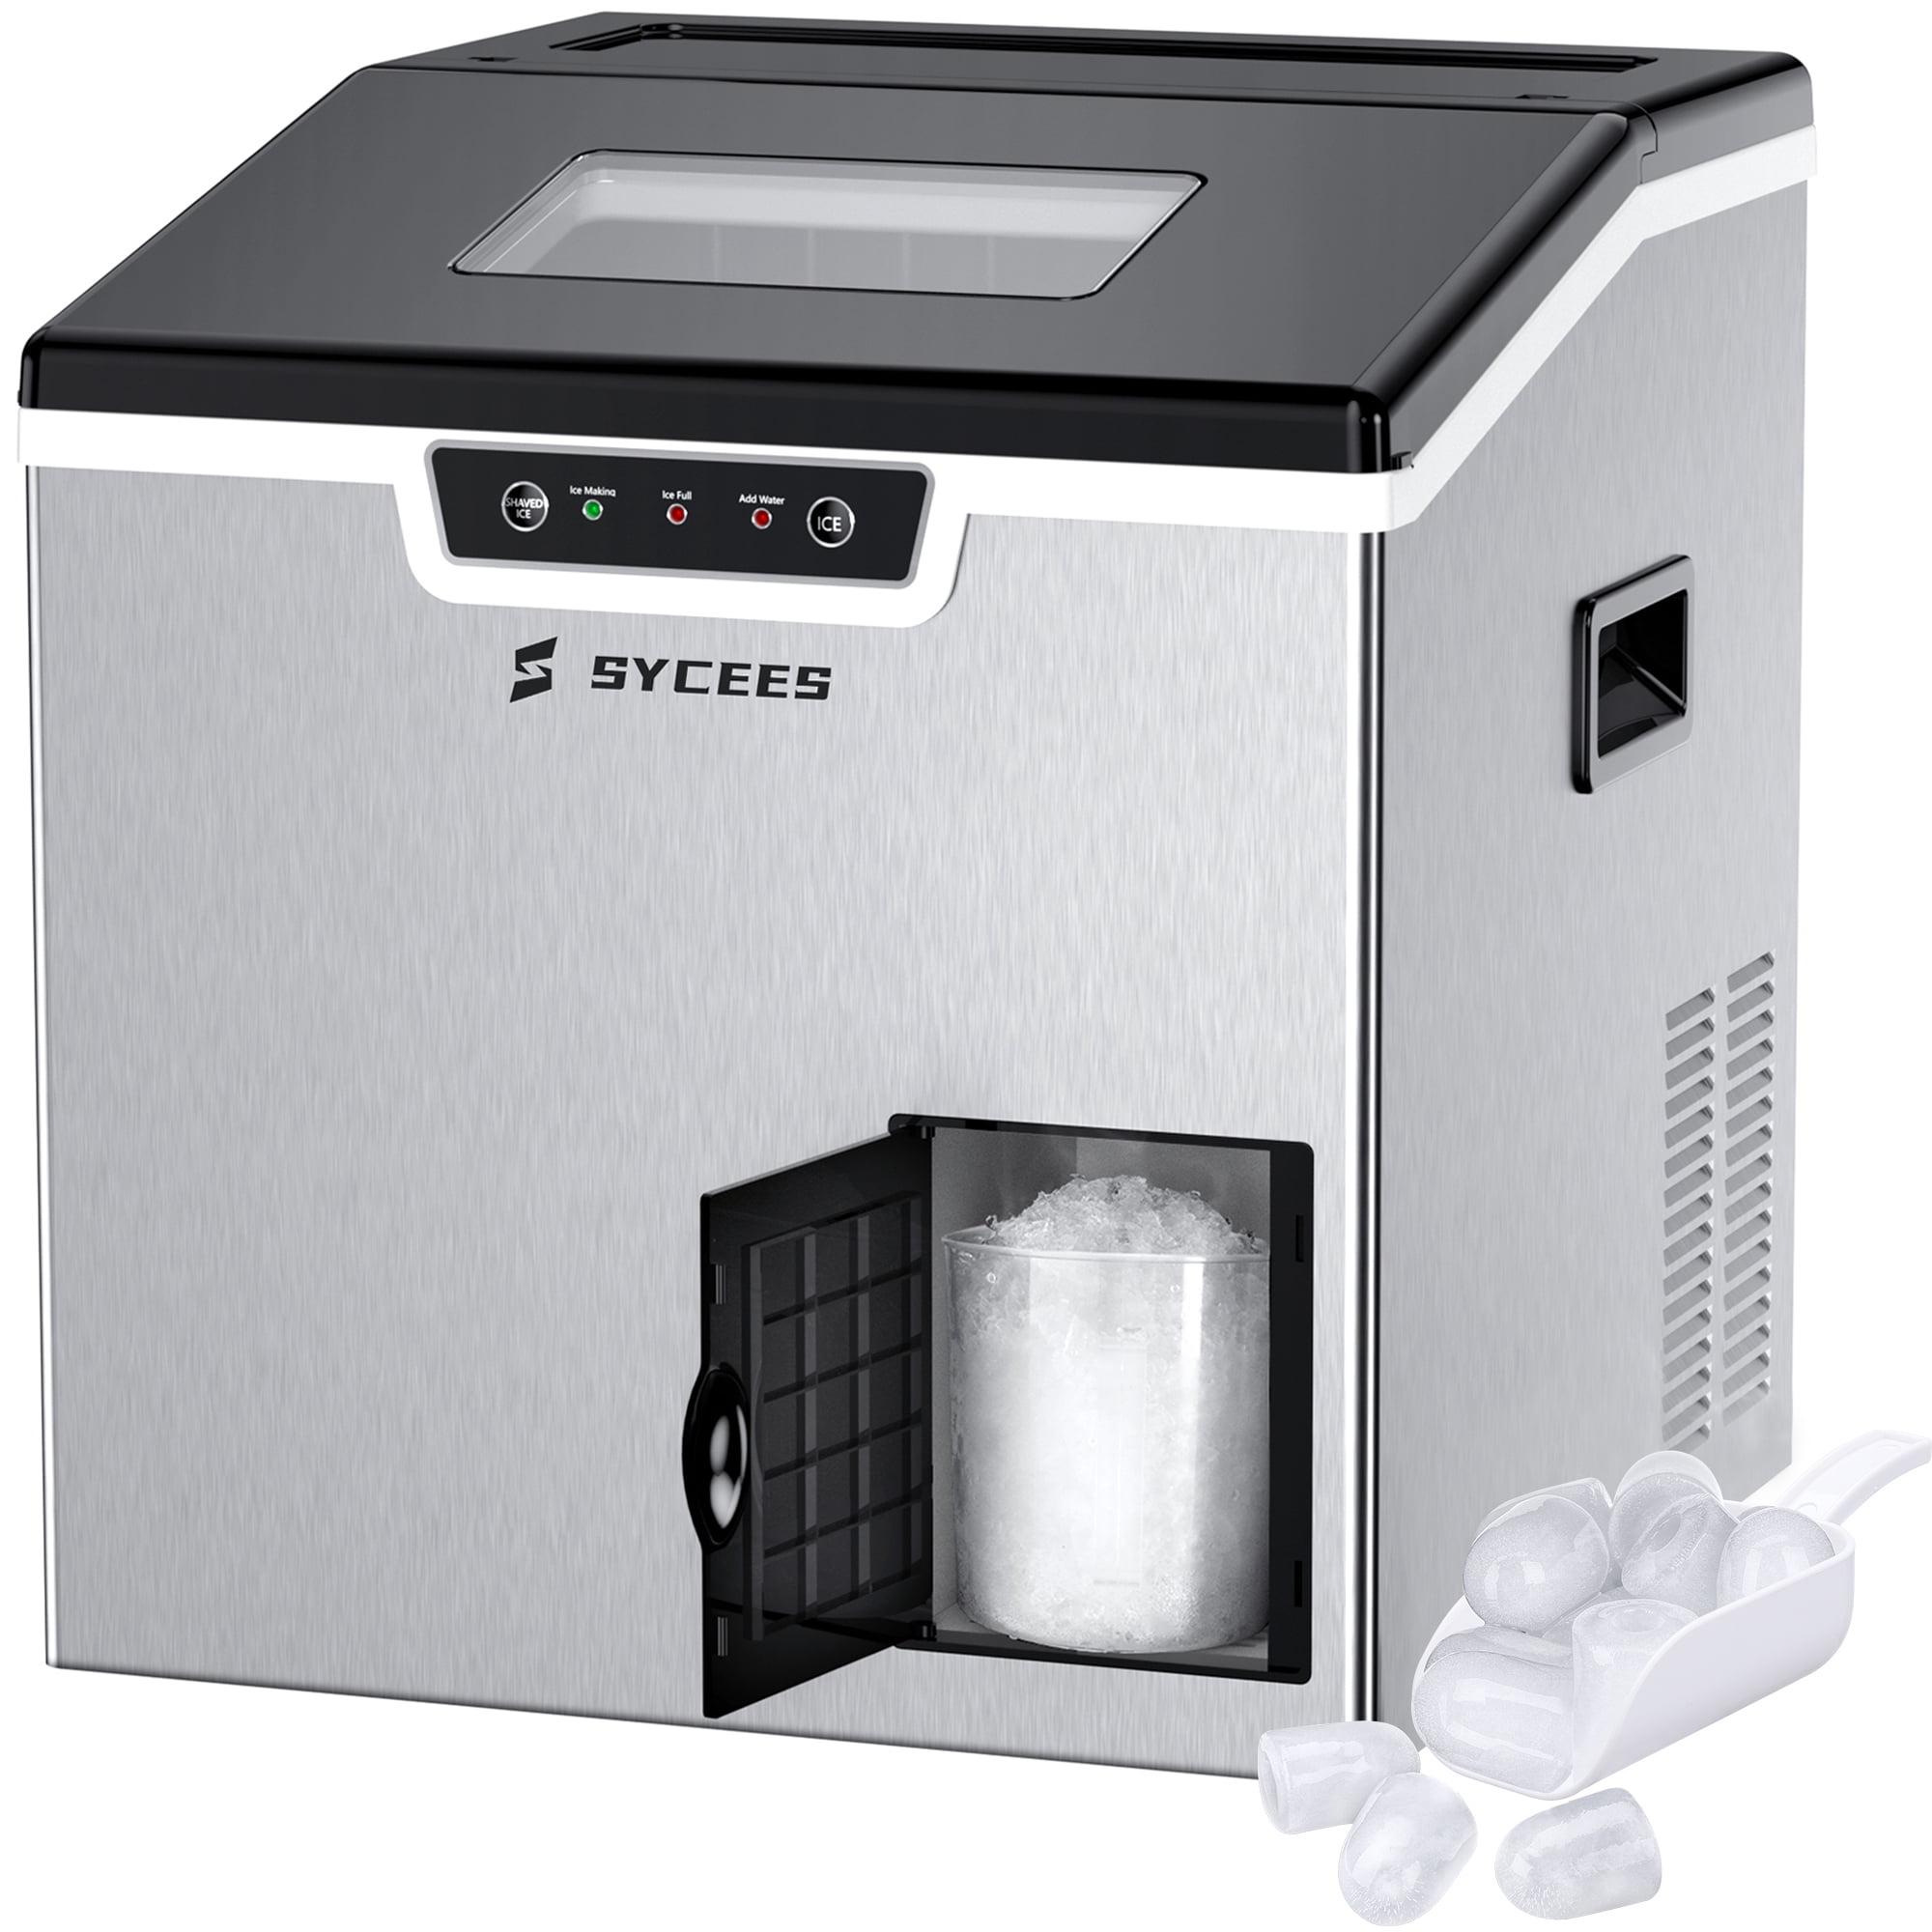 Commercial Ice Maker Stainless Steel 300W Ice Cube Maker Machine 2,304 Cubes Per Day Ice Making Machine Home Supermarkets Bars Restaurants Cafes Kitchen Free Ice Scoop and Free Ice Crusher 